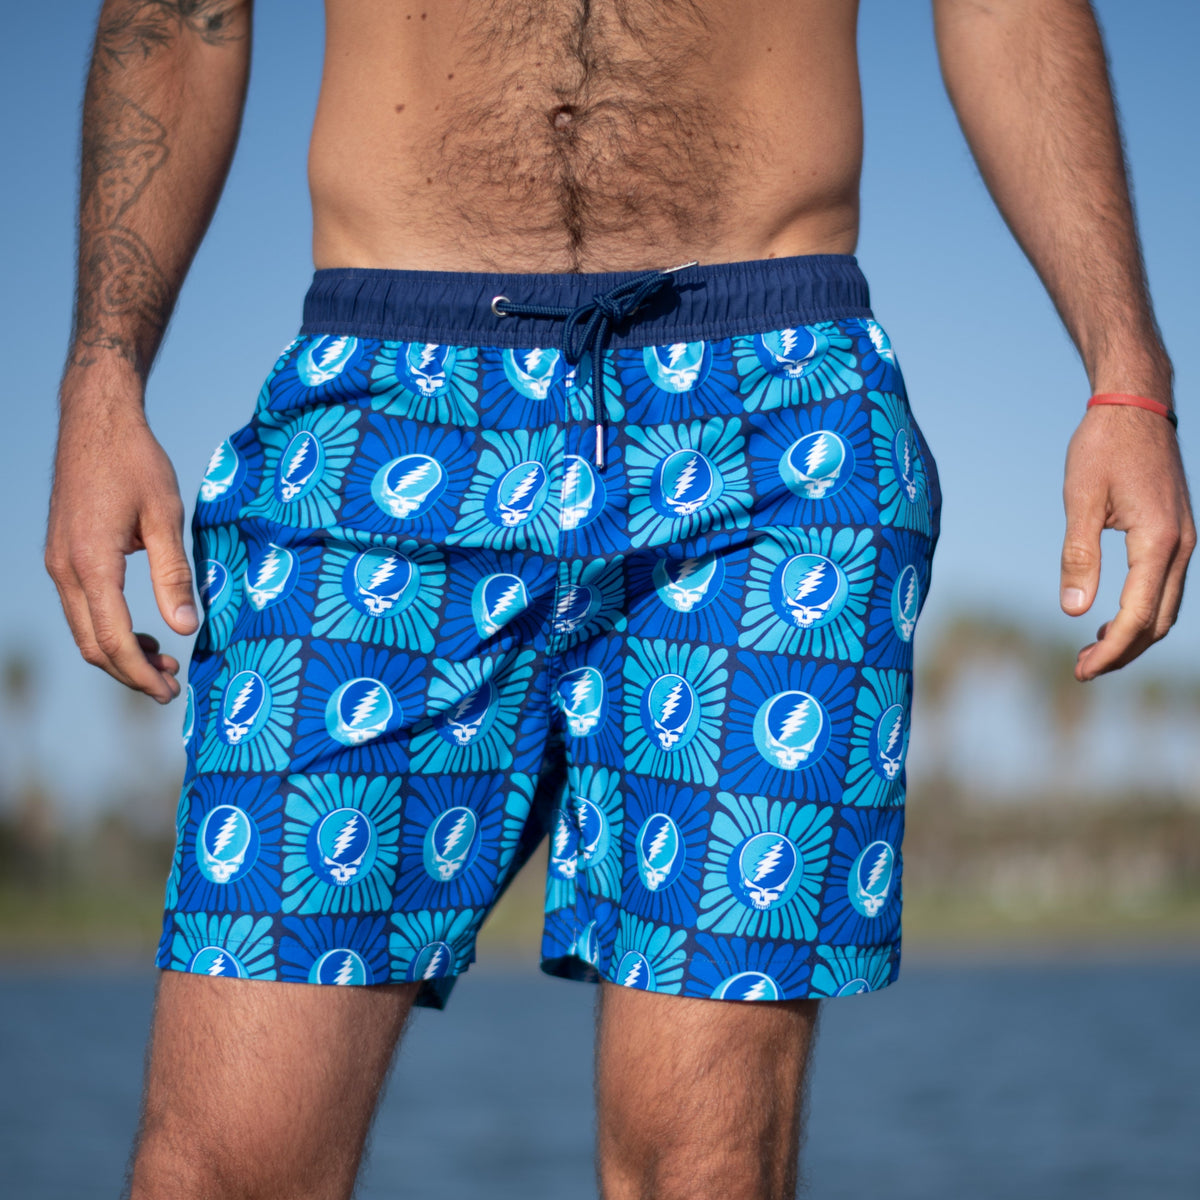 Grateful Dead Swim Trunk Navy & Blue Steal Your Face - Section 119